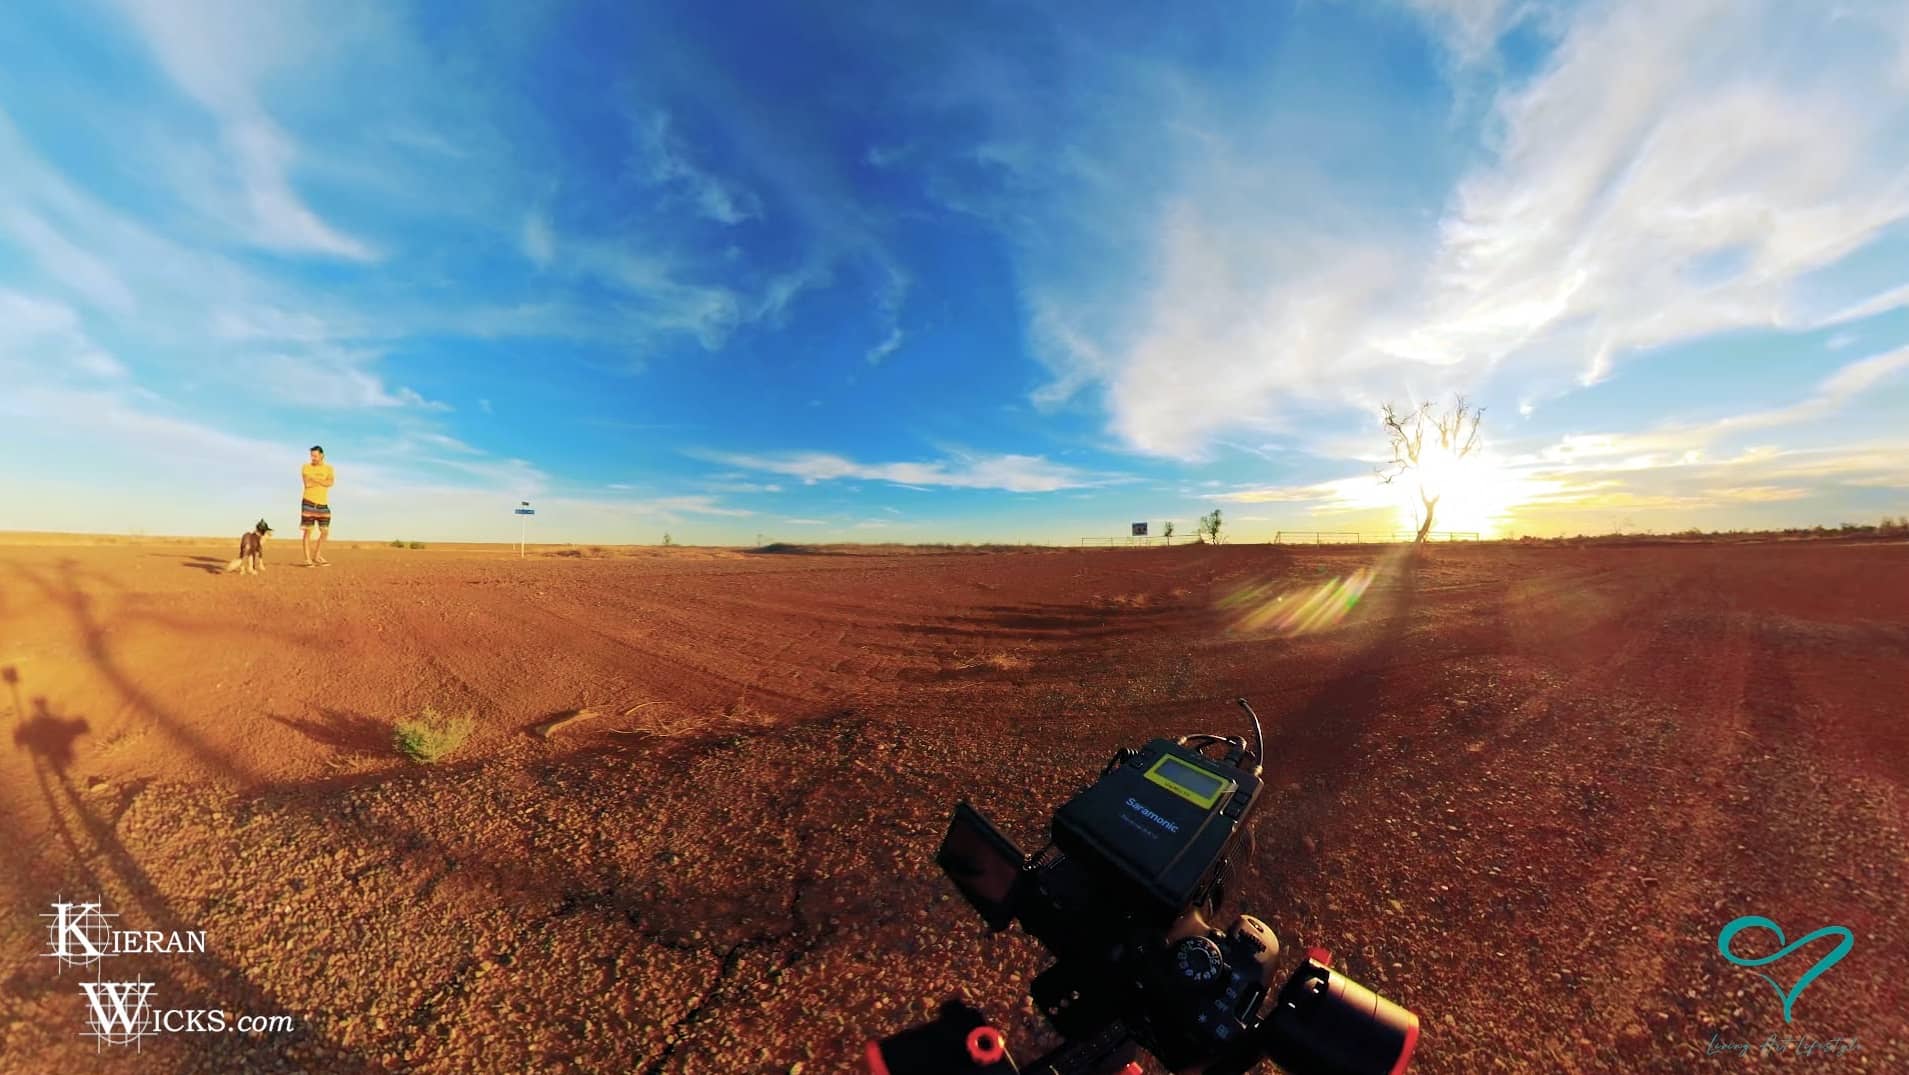 ONE TOWN AT A TIME EP 4 SCREENSHOT 5 - QLD OUTBACK SUNSET GO PRO 360VR OVERCAPTURE B RED EARTH SAND DEAD TREE IN SUNSET BARCALDINE